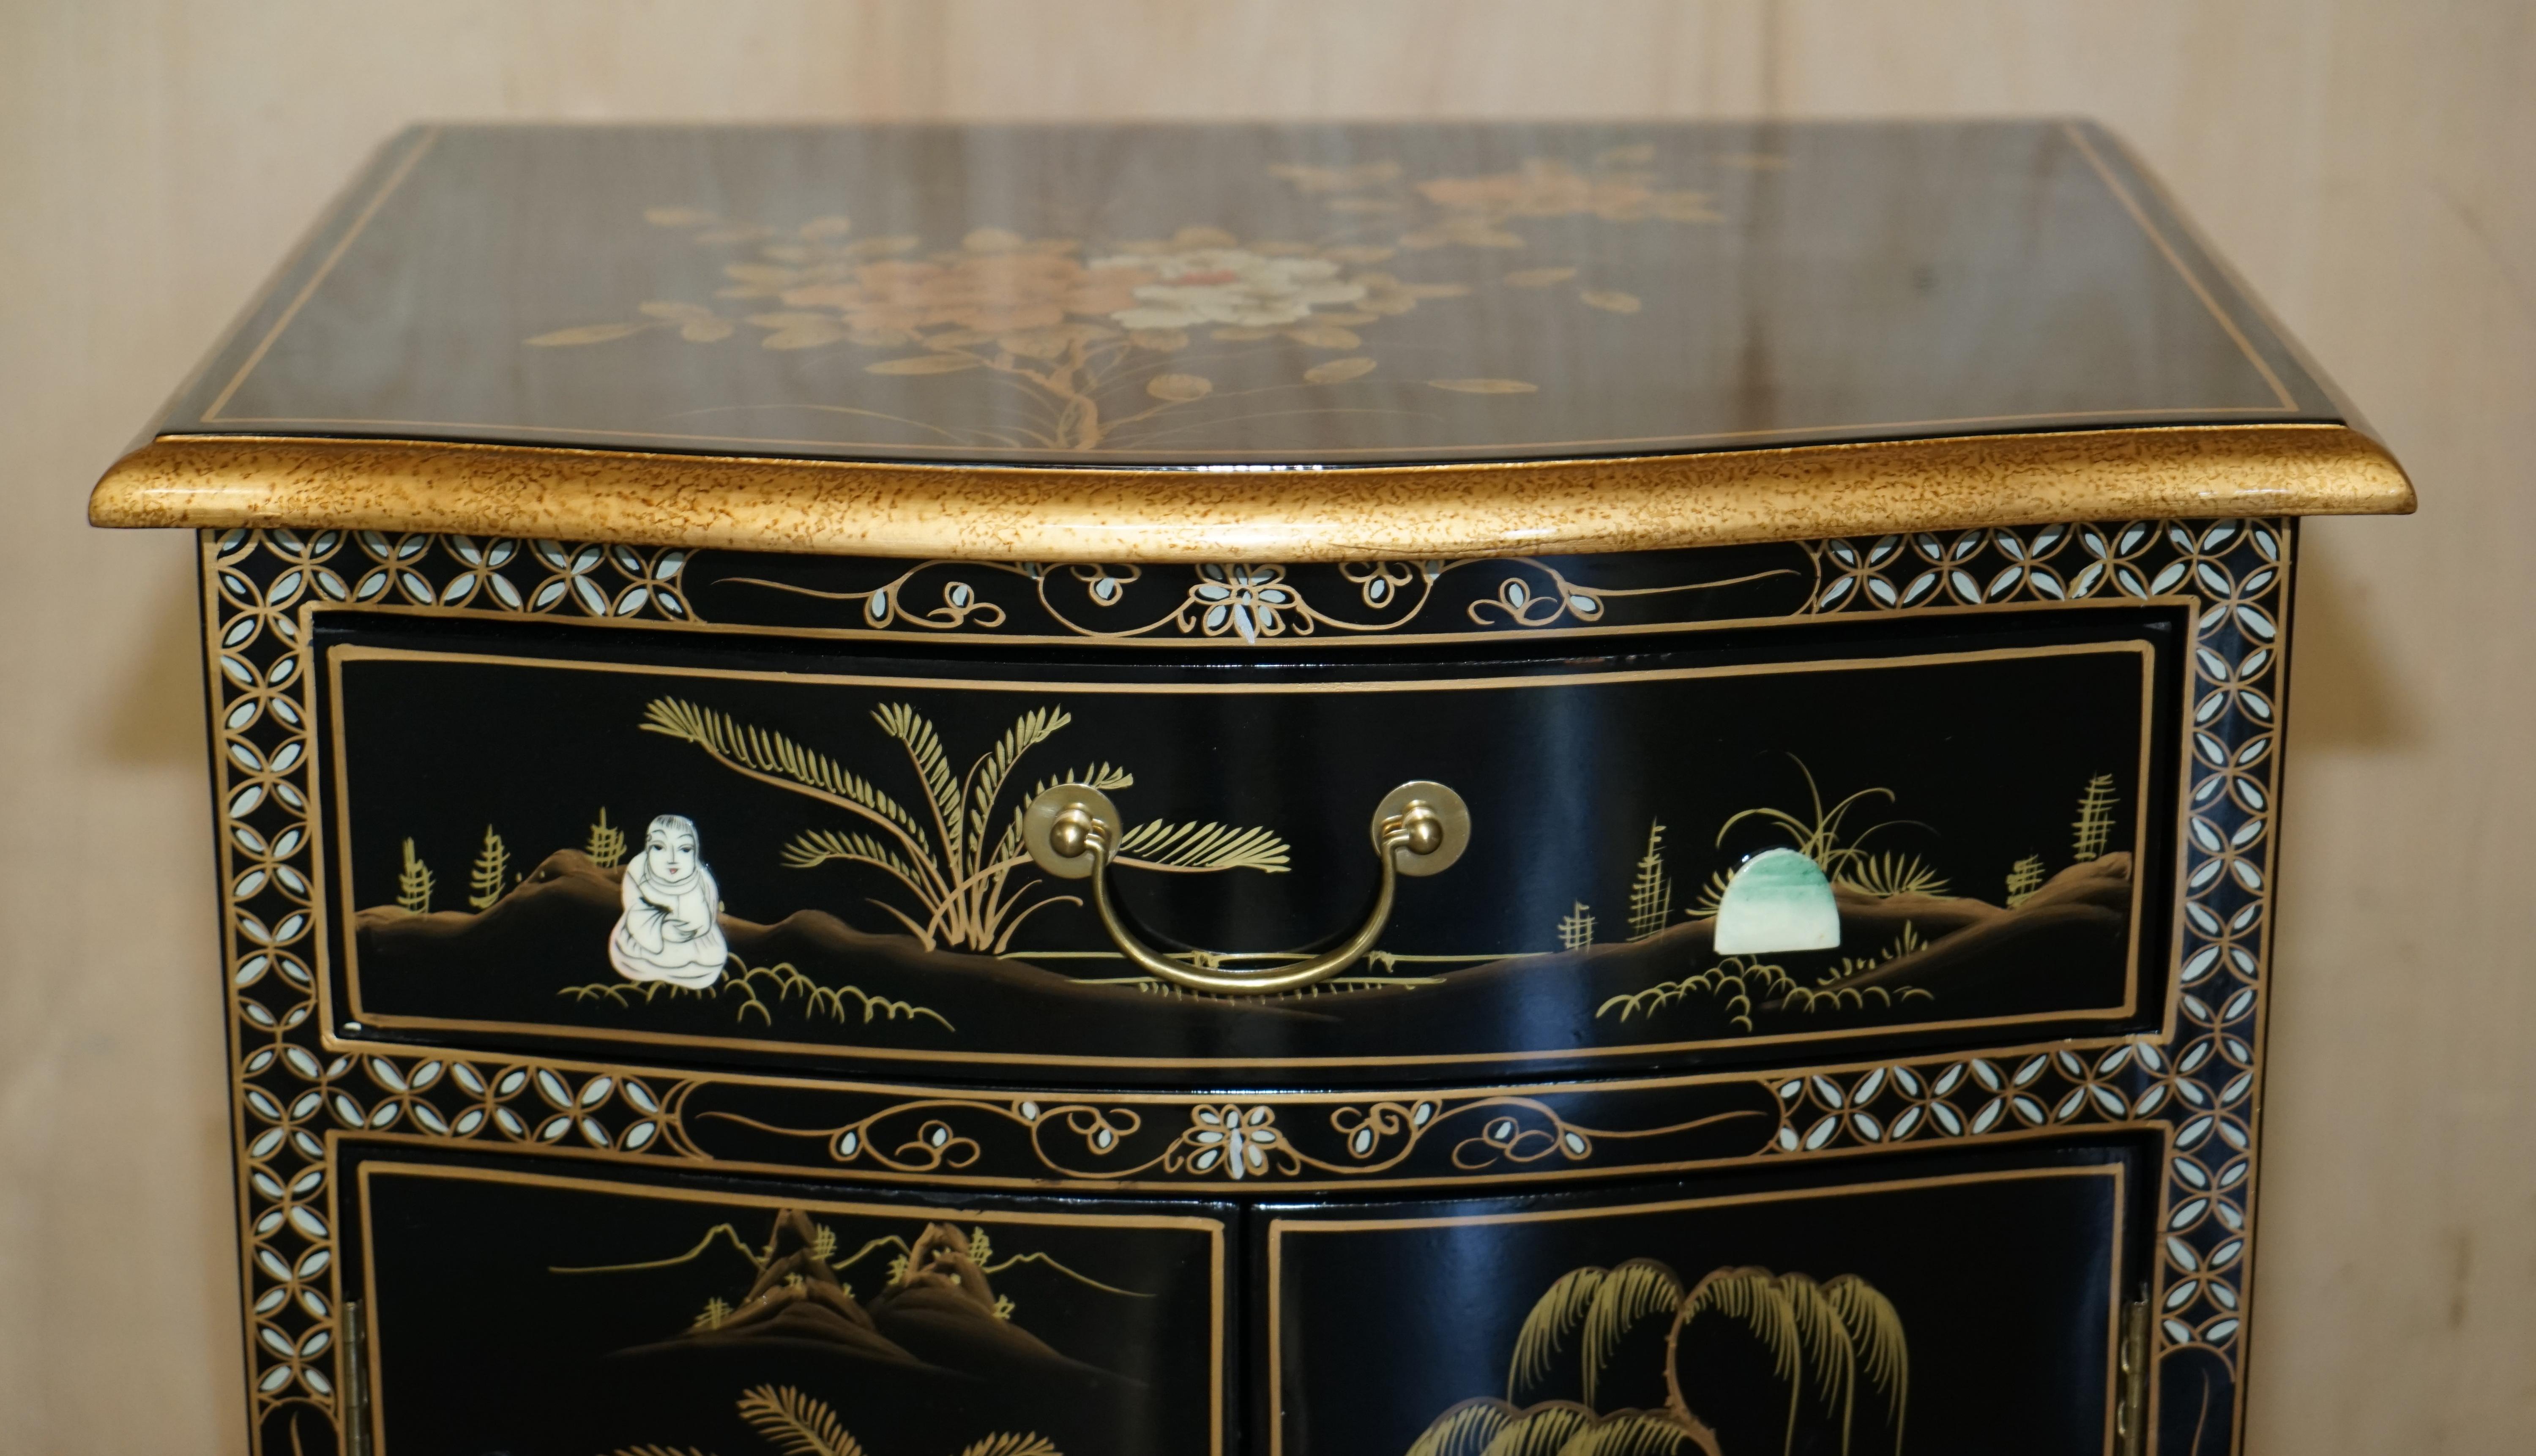 Chinois CHINOISERIE DÉCORative GEISHA GIRLS LACQUER SiDE CABINET SOAPSTONE en vente